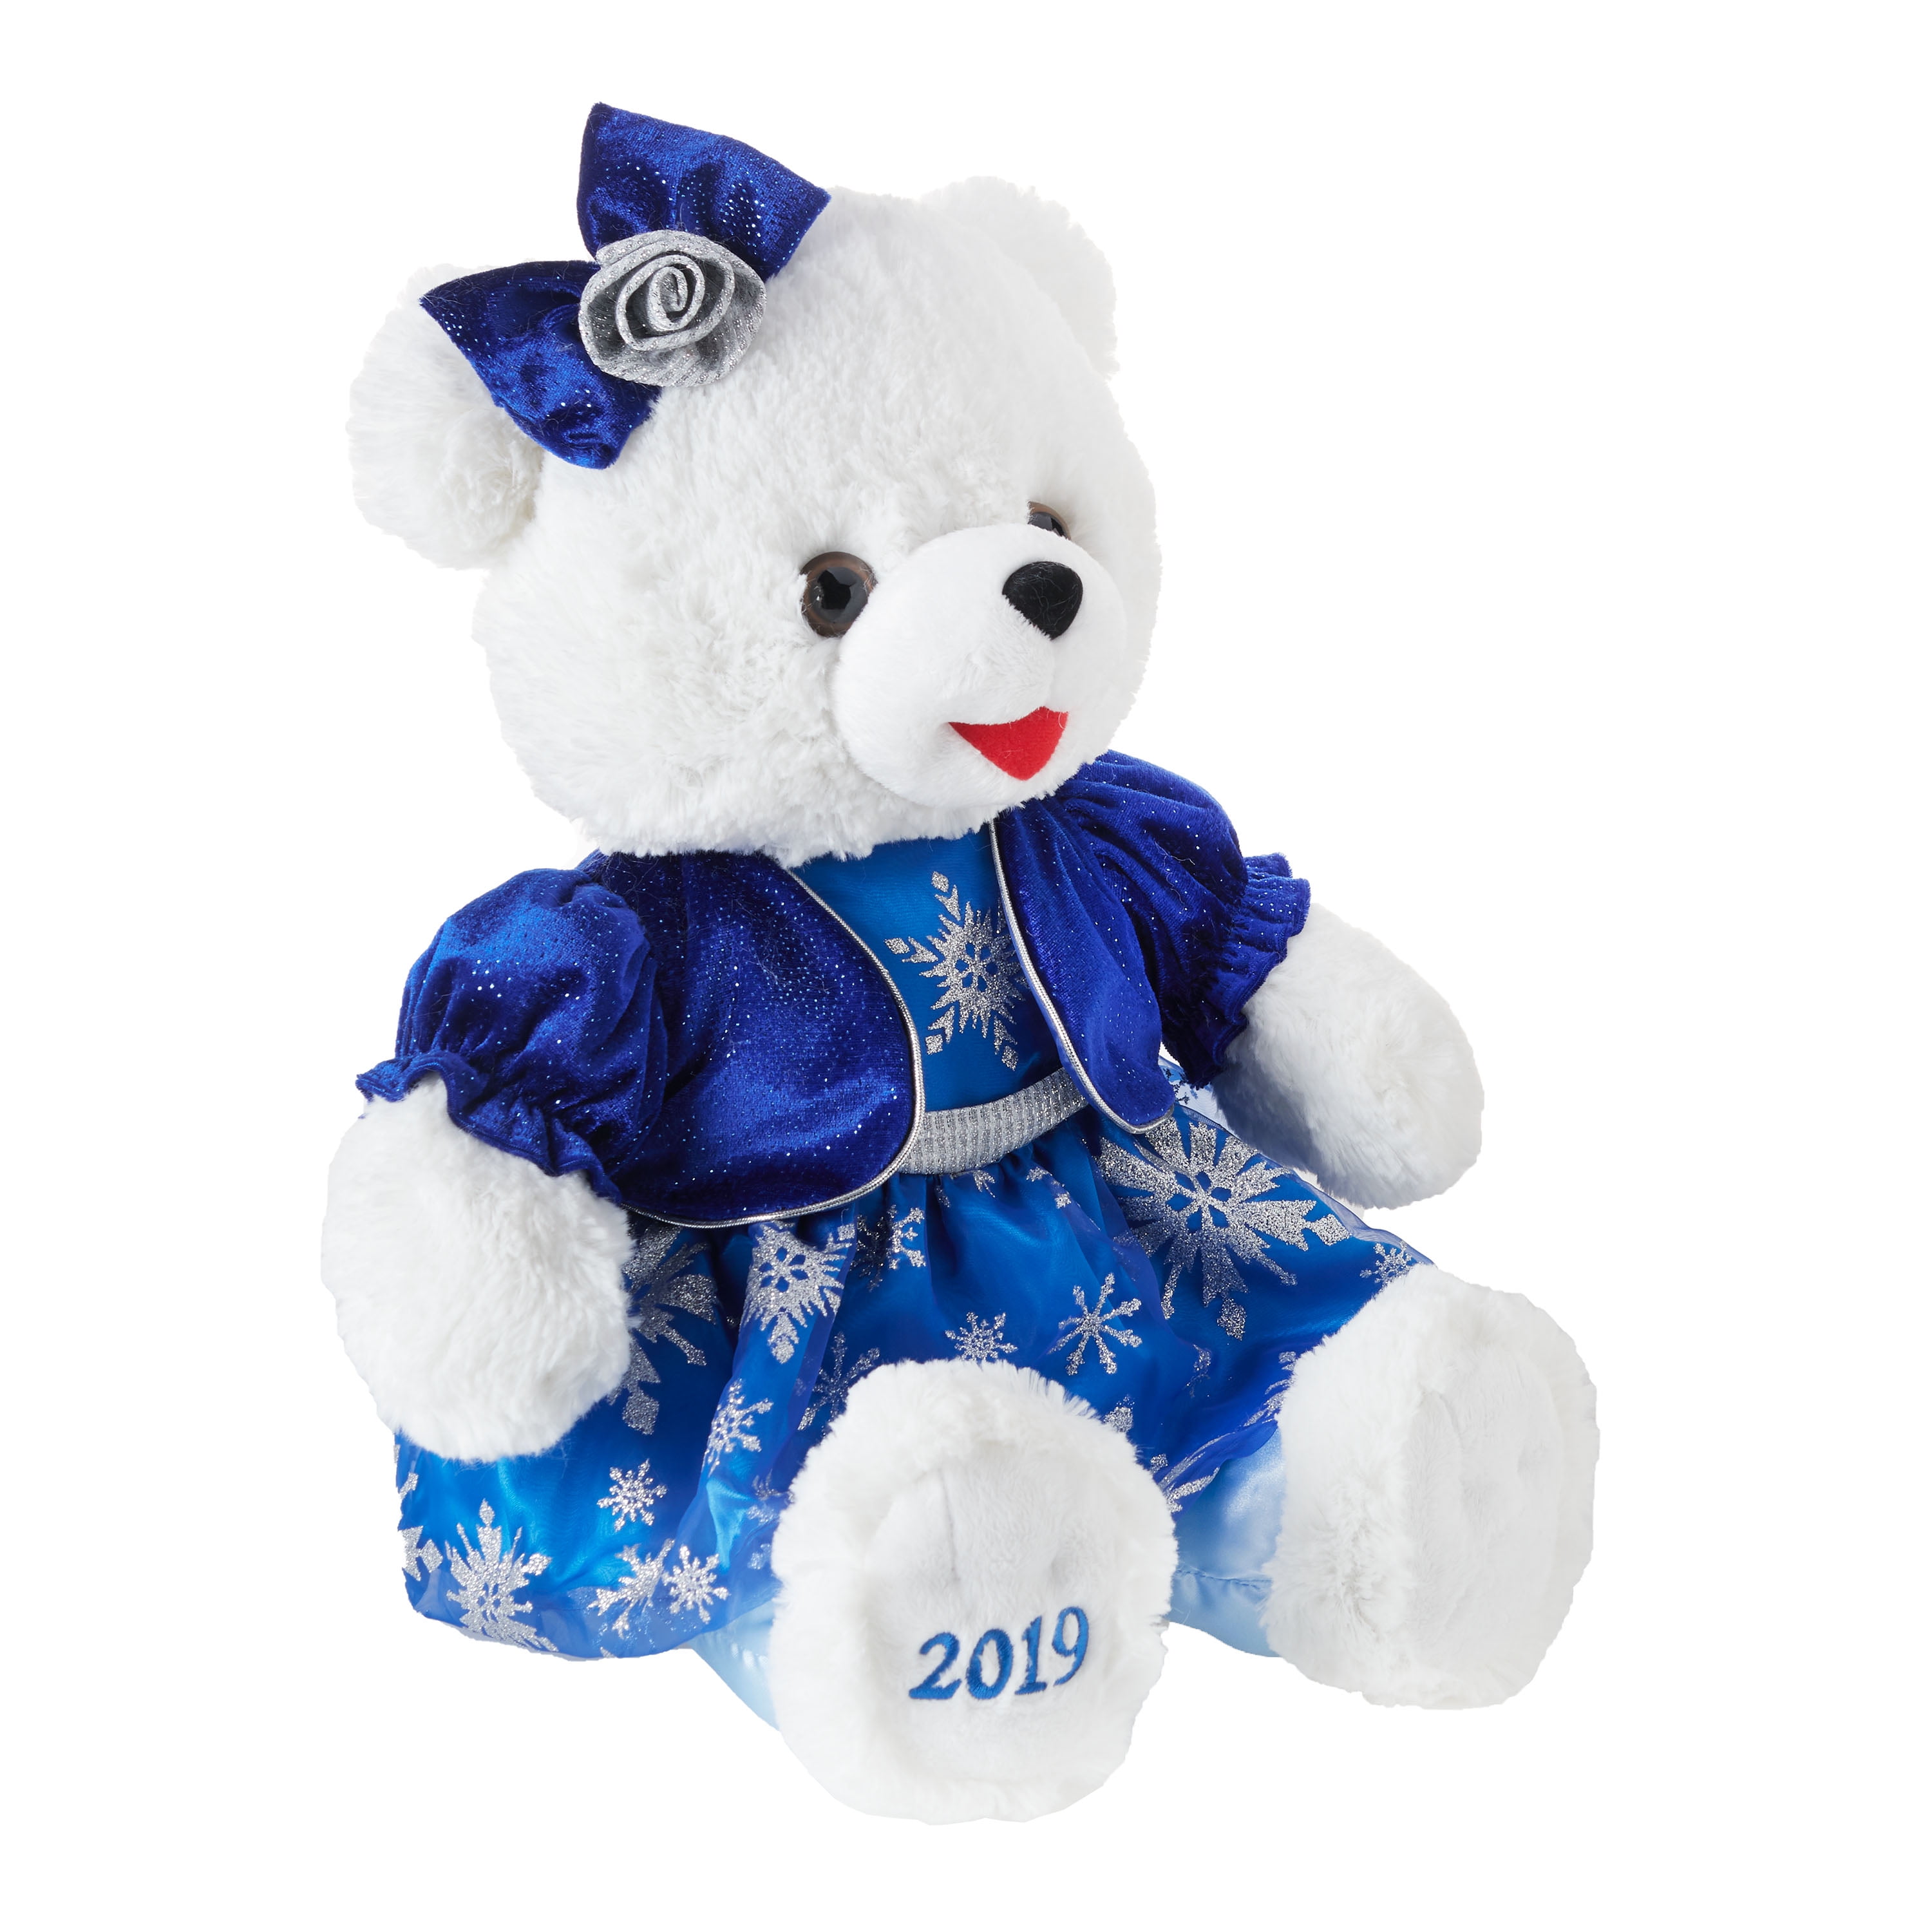 2020 Christmas White with Blue Girl Plush Stuffed Teddy Bear by Holiday Time 10" 